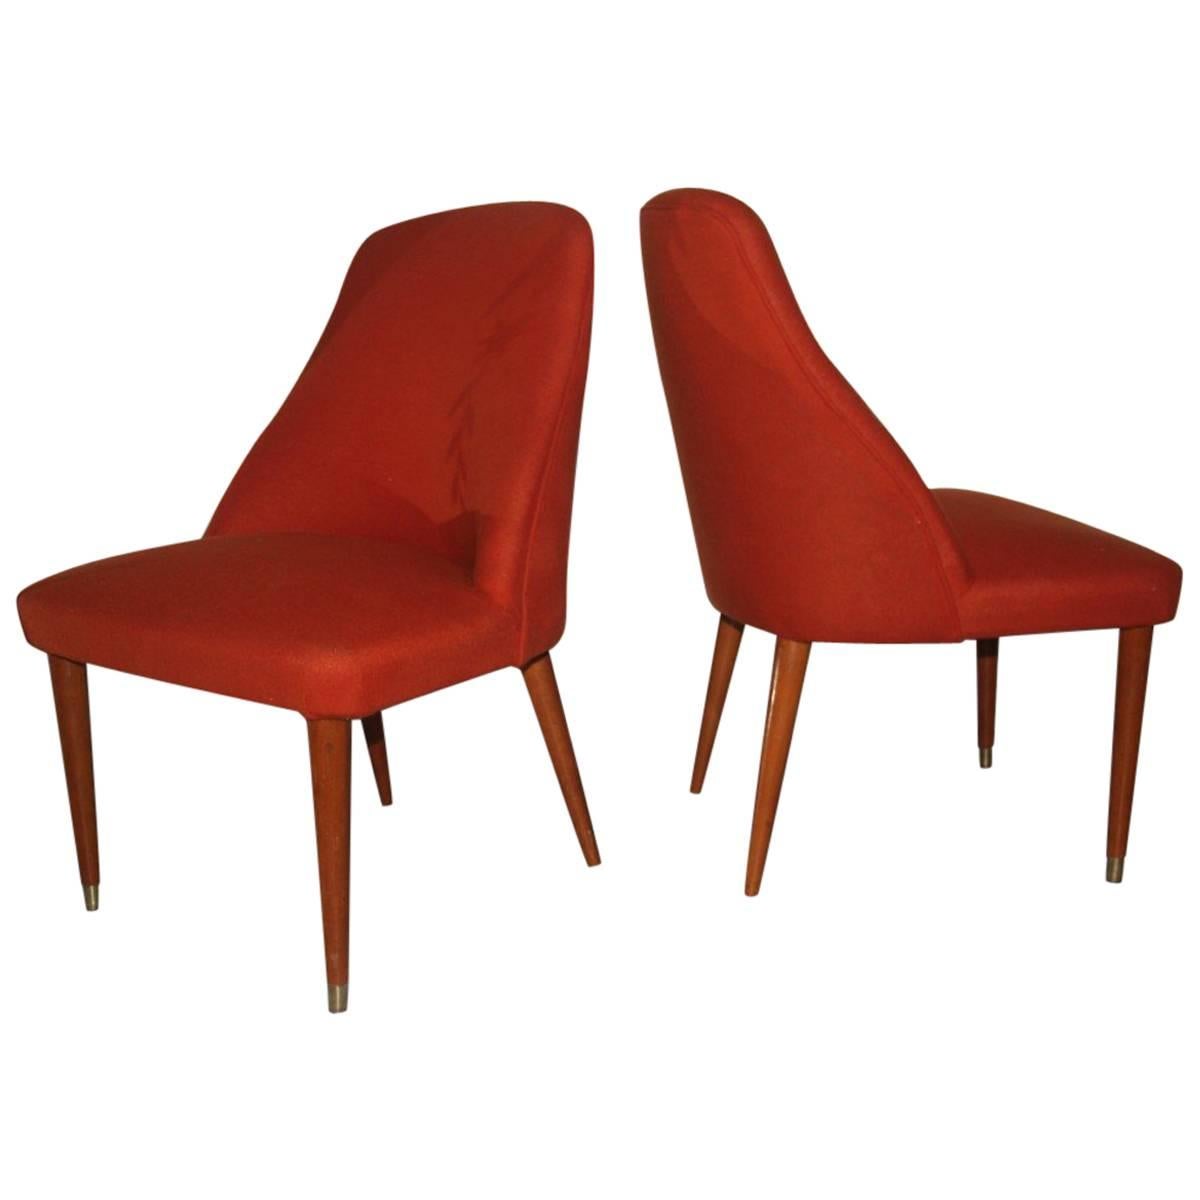 Pair of Very Particular Form Chairs Mid-Century Design Italian